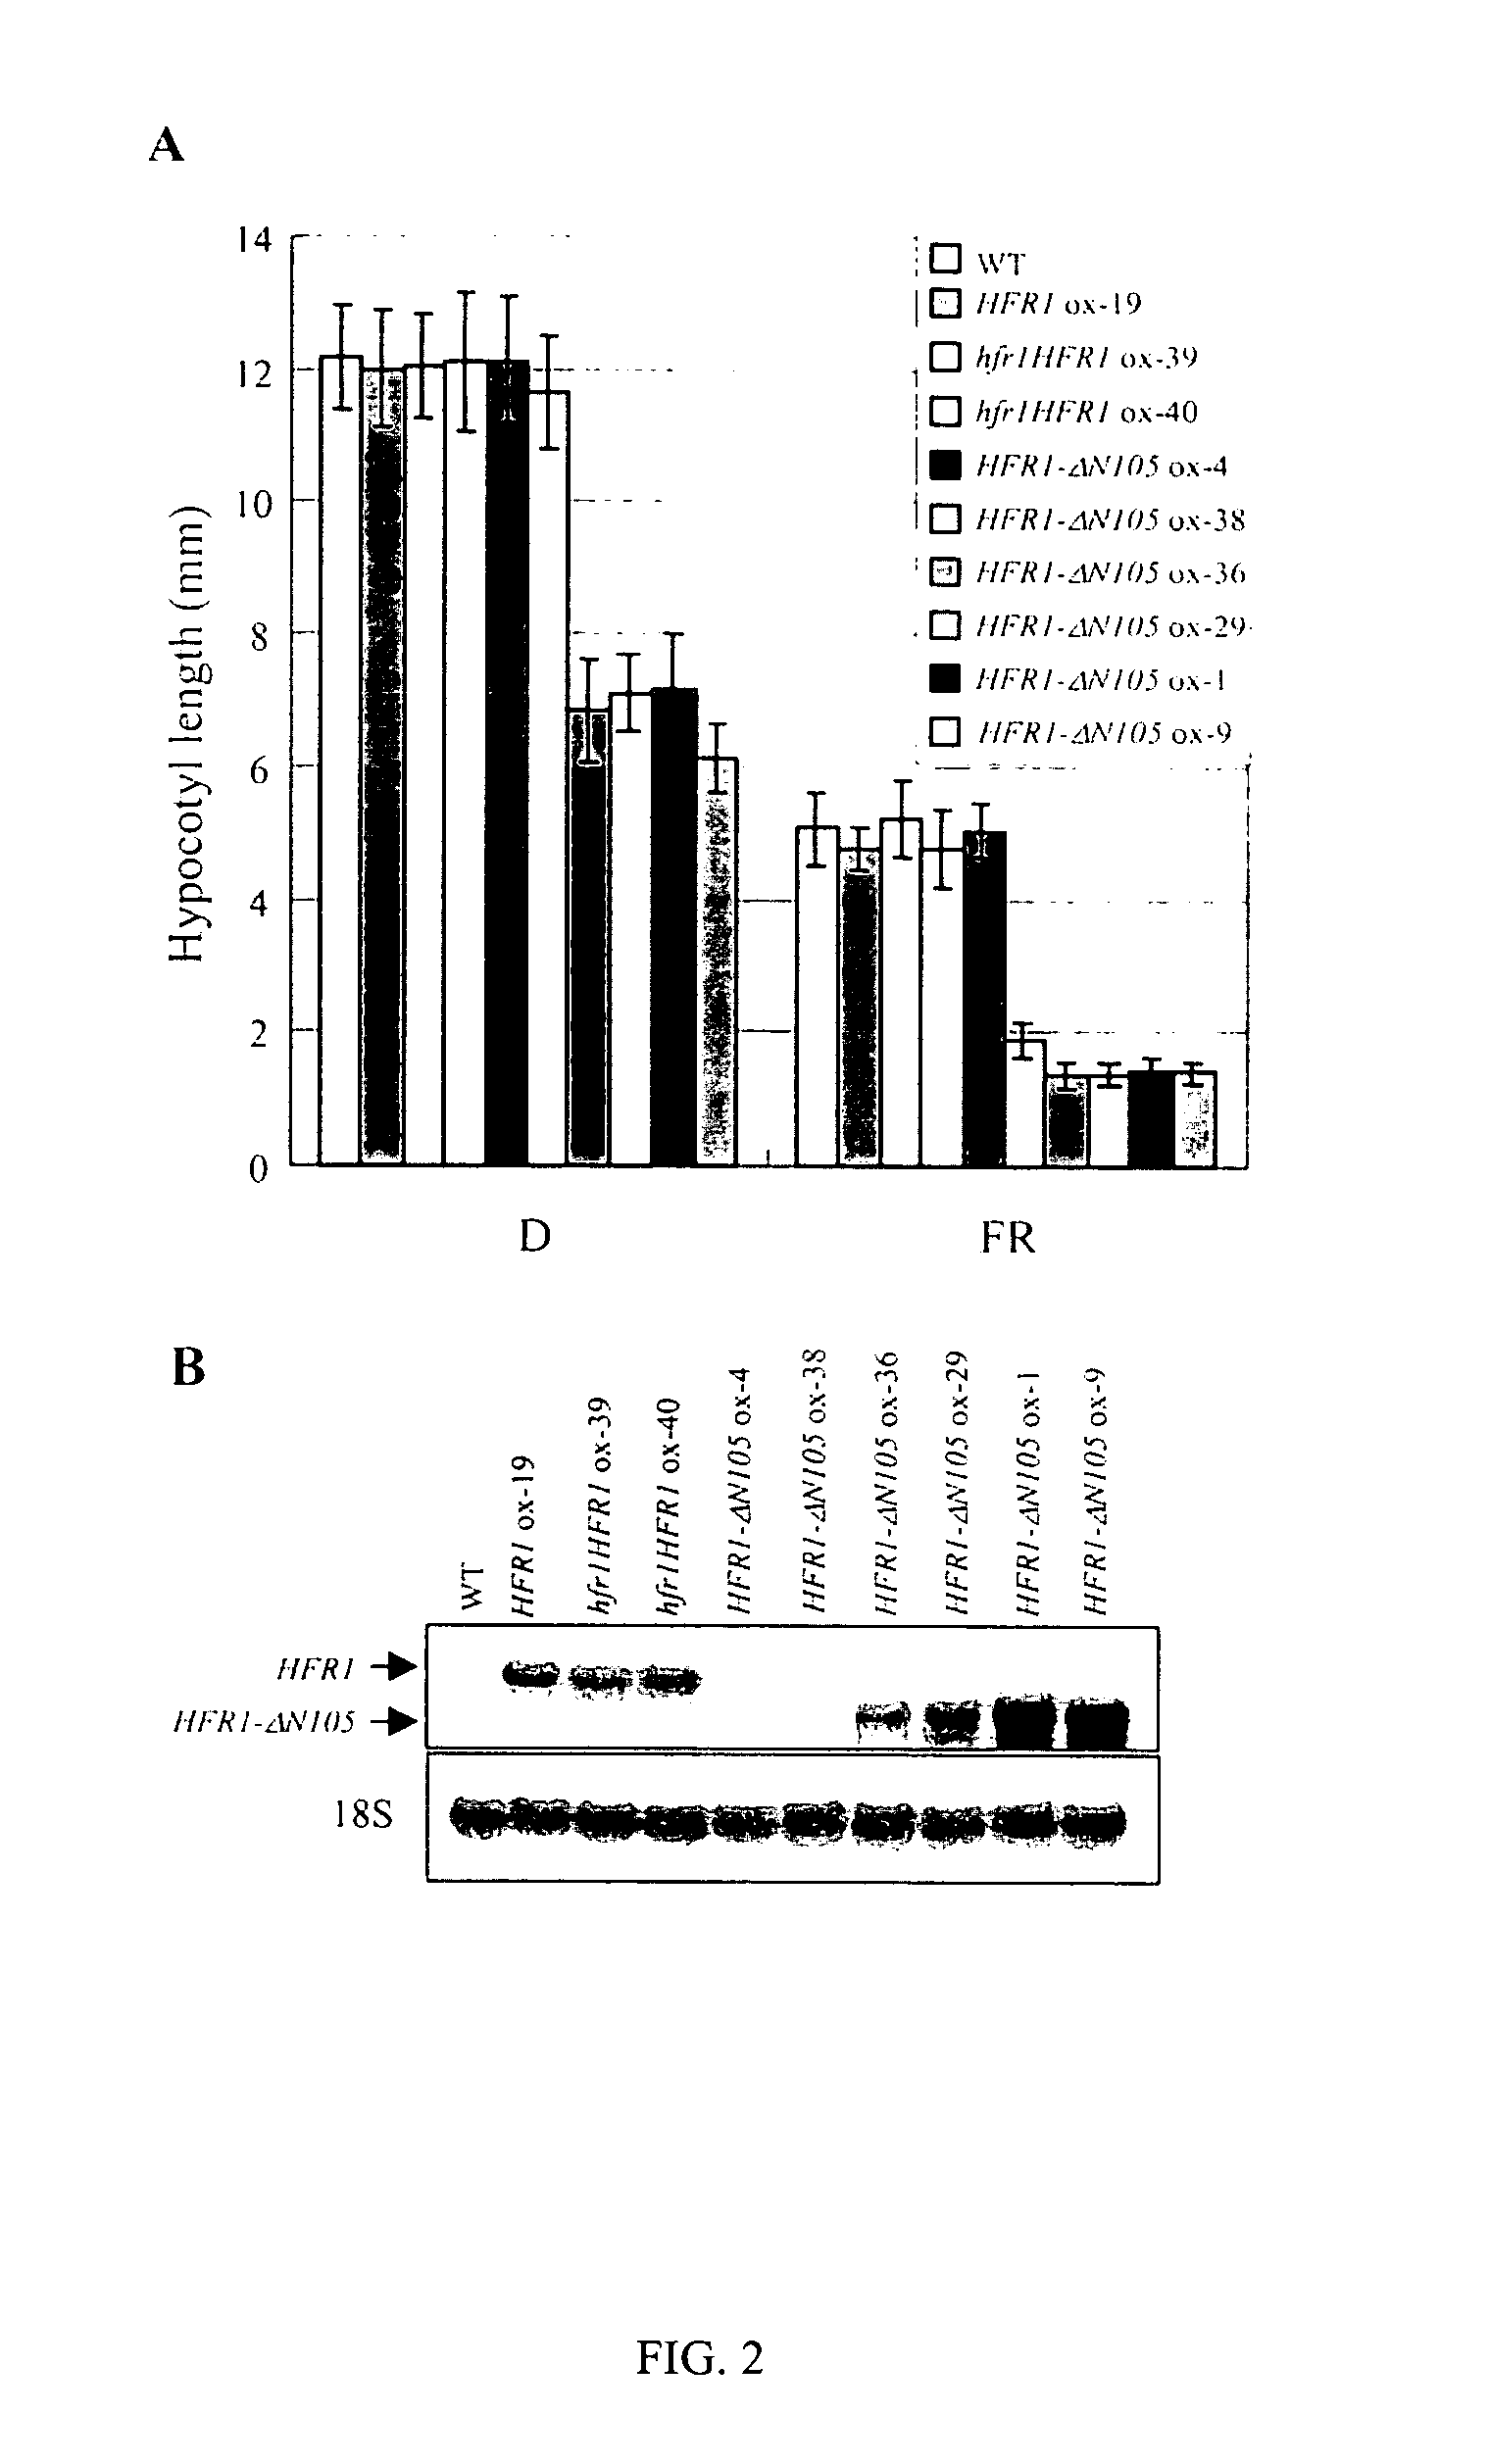 Hyperactive light signal related molecule of HFR1-DeltaN105 and transgenic plant thereof